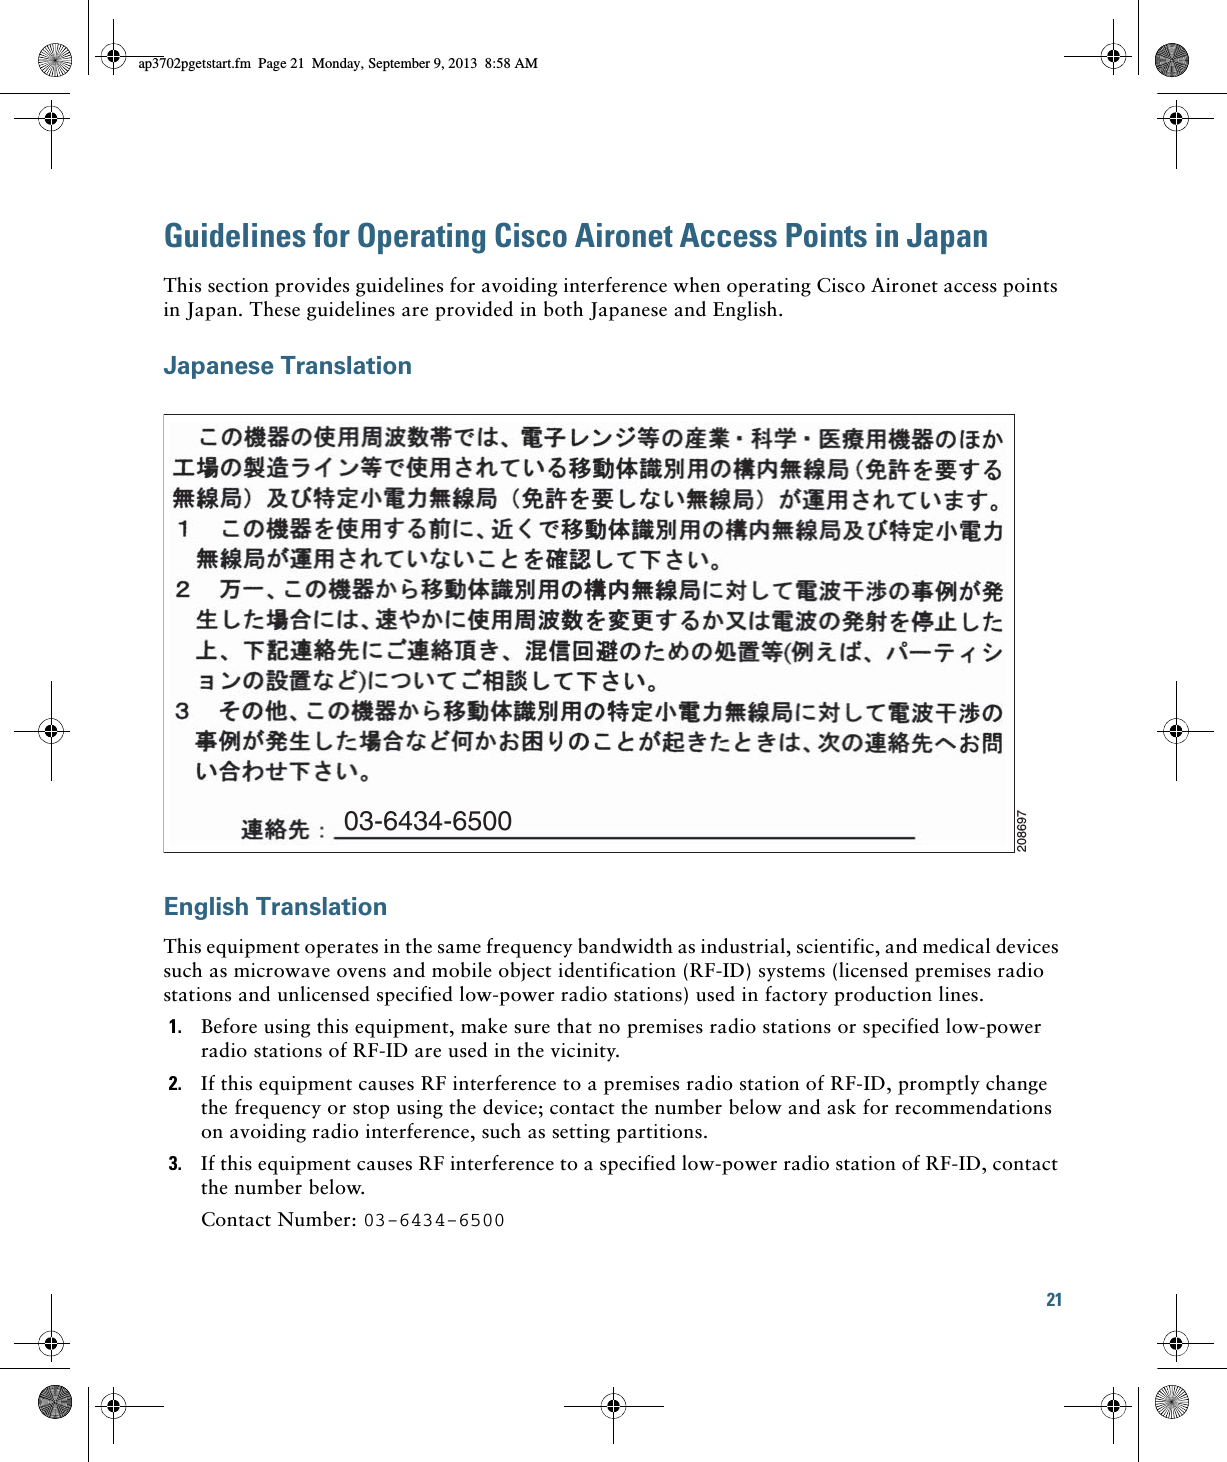 21 Guidelines for Operating Cisco Aironet Access Points in JapanThis section provides guidelines for avoiding interference when operating Cisco Aironet access points in Japan. These guidelines are provided in both Japanese and English.Japanese TranslationEnglish TranslationThis equipment operates in the same frequency bandwidth as industrial, scientific, and medical devices such as microwave ovens and mobile object identification (RF-ID) systems (licensed premises radio stations and unlicensed specified low-power radio stations) used in factory production lines.1. Before using this equipment, make sure that no premises radio stations or specified low-power radio stations of RF-ID are used in the vicinity.2. If this equipment causes RF interference to a premises radio station of RF-ID, promptly change the frequency or stop using the device; contact the number below and ask for recommendations on avoiding radio interference, such as setting partitions.3. If this equipment causes RF interference to a specified low-power radio station of RF-ID, contact the number below.Contact Number: 03-6434-650003-6434-6500208697ap3702pgetstart.fm  Page 21  Monday, September 9, 2013  8:58 AM